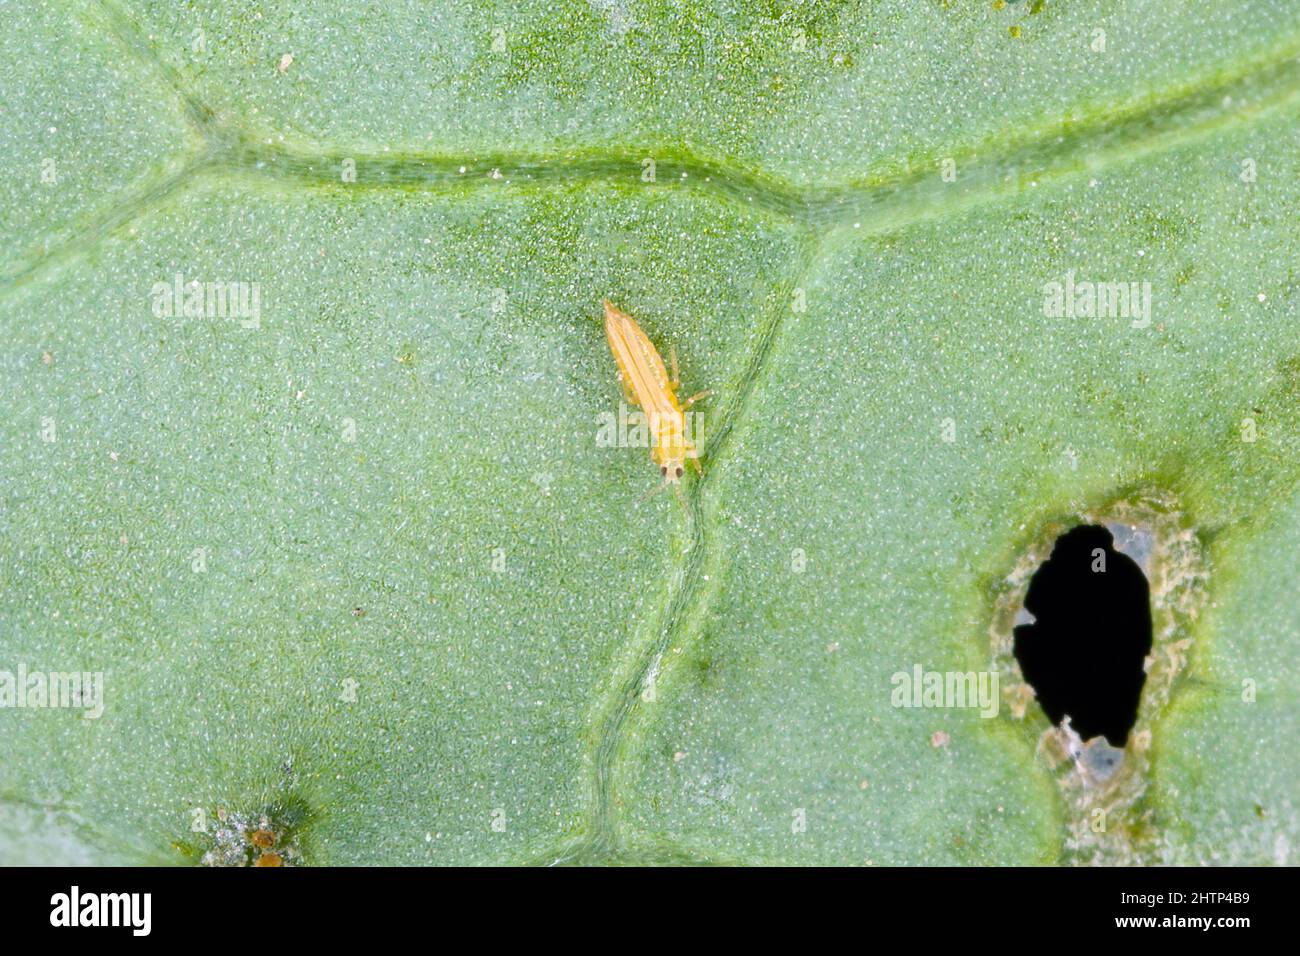 Adult of tiny thrip on the leaf. Stock Photo